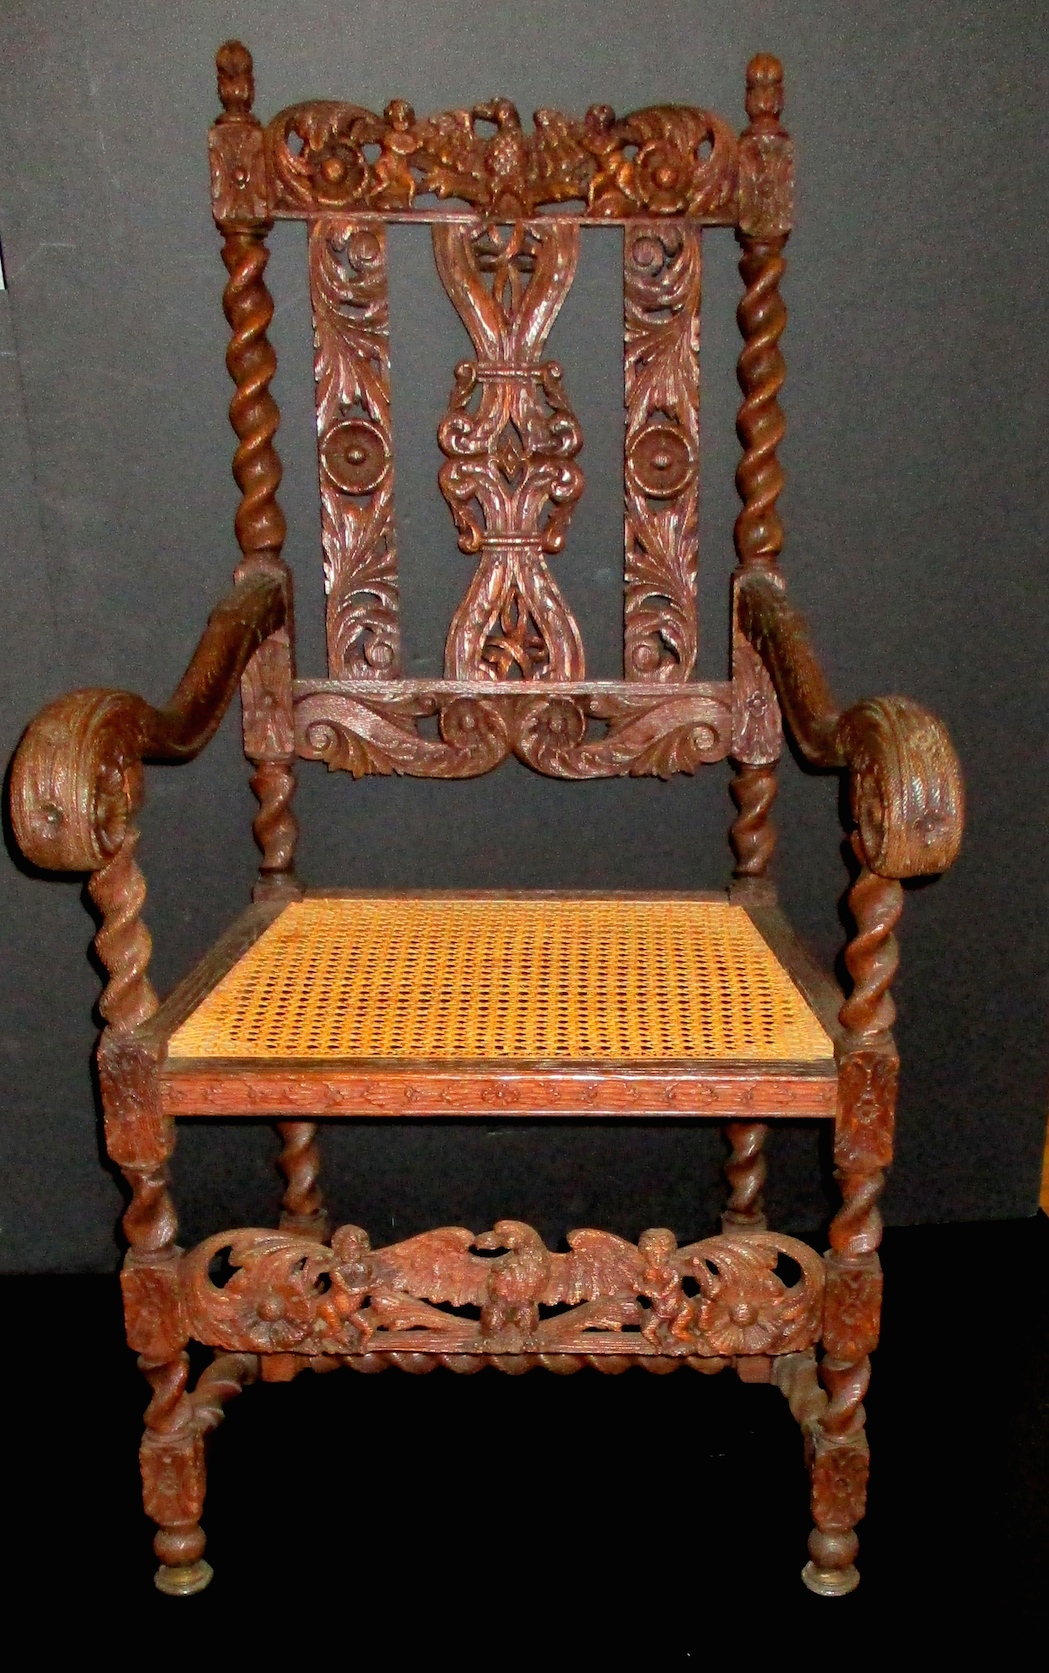 Highly Carved Oak Throne Chair w/Cane Seat (23 1/2" D x 25" W x 35" H)